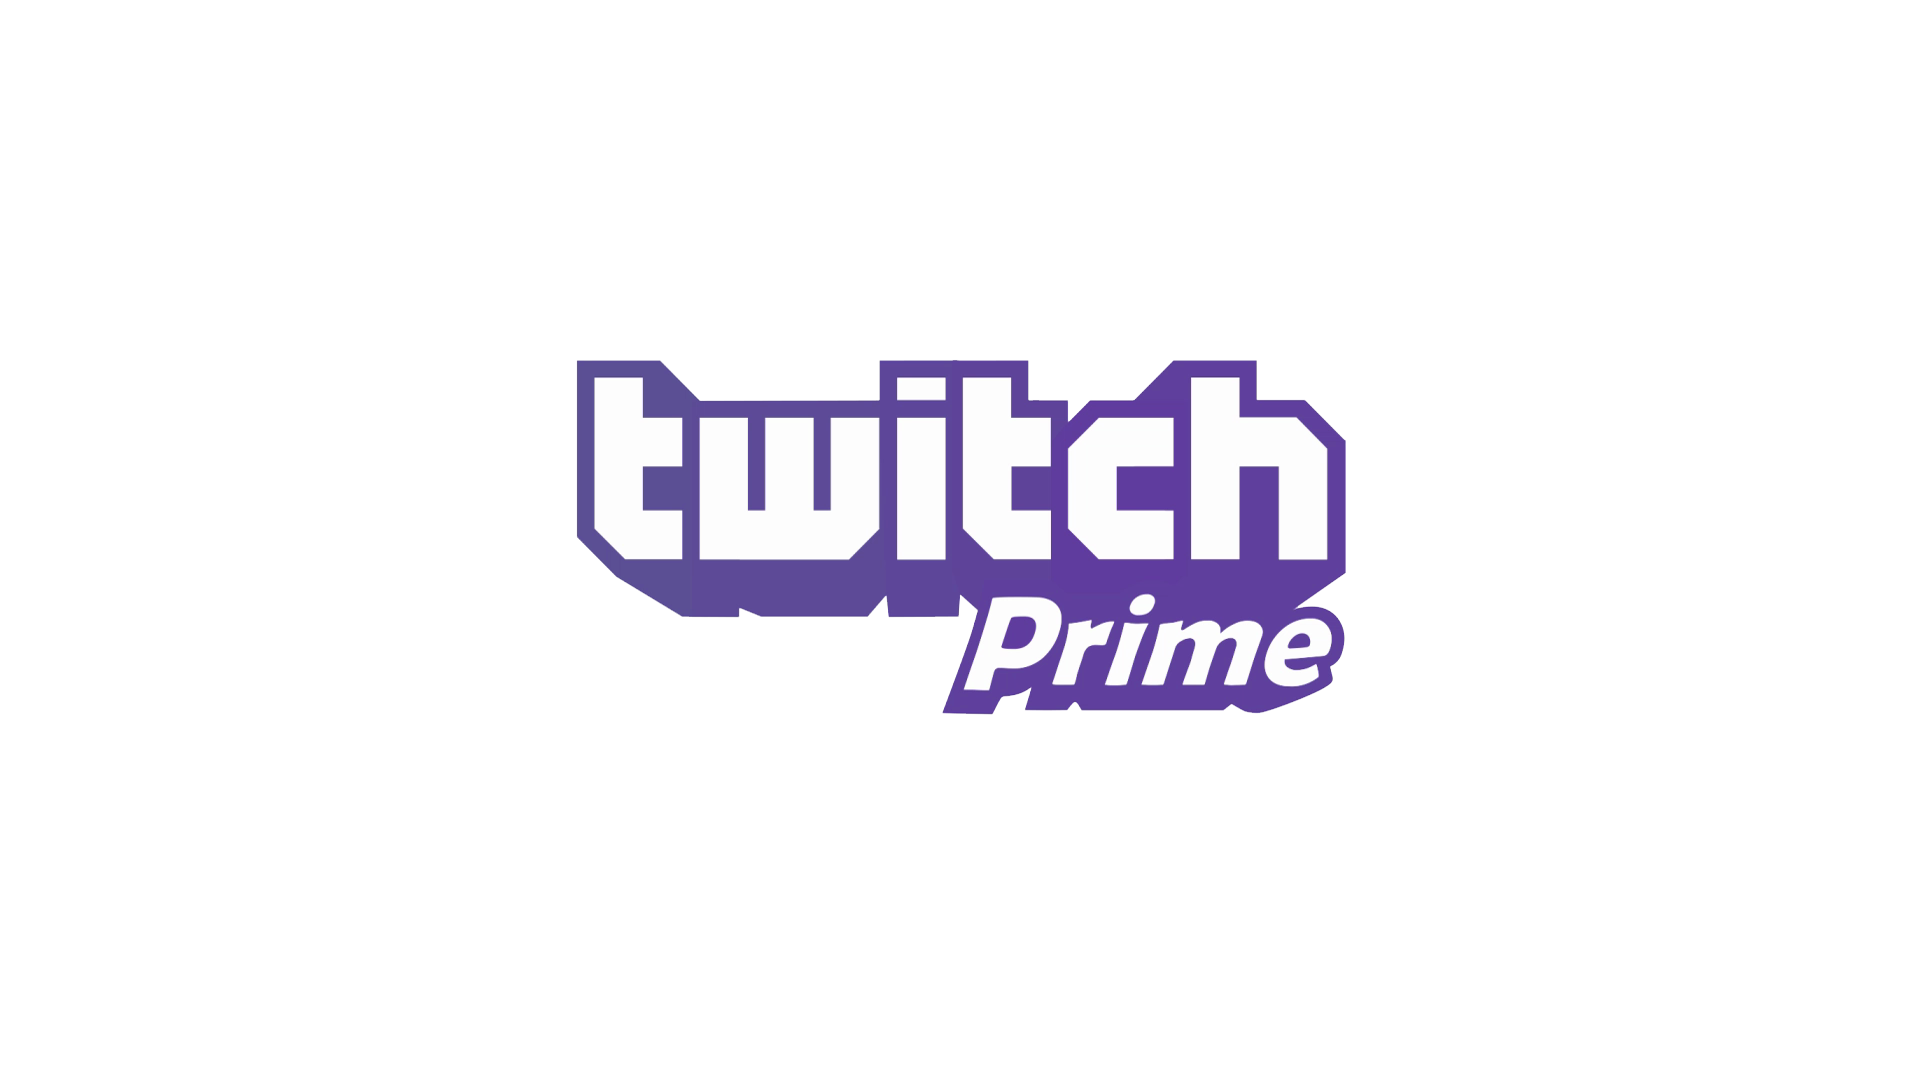 twitch prime logo high resolution PNG Image  PurePNG